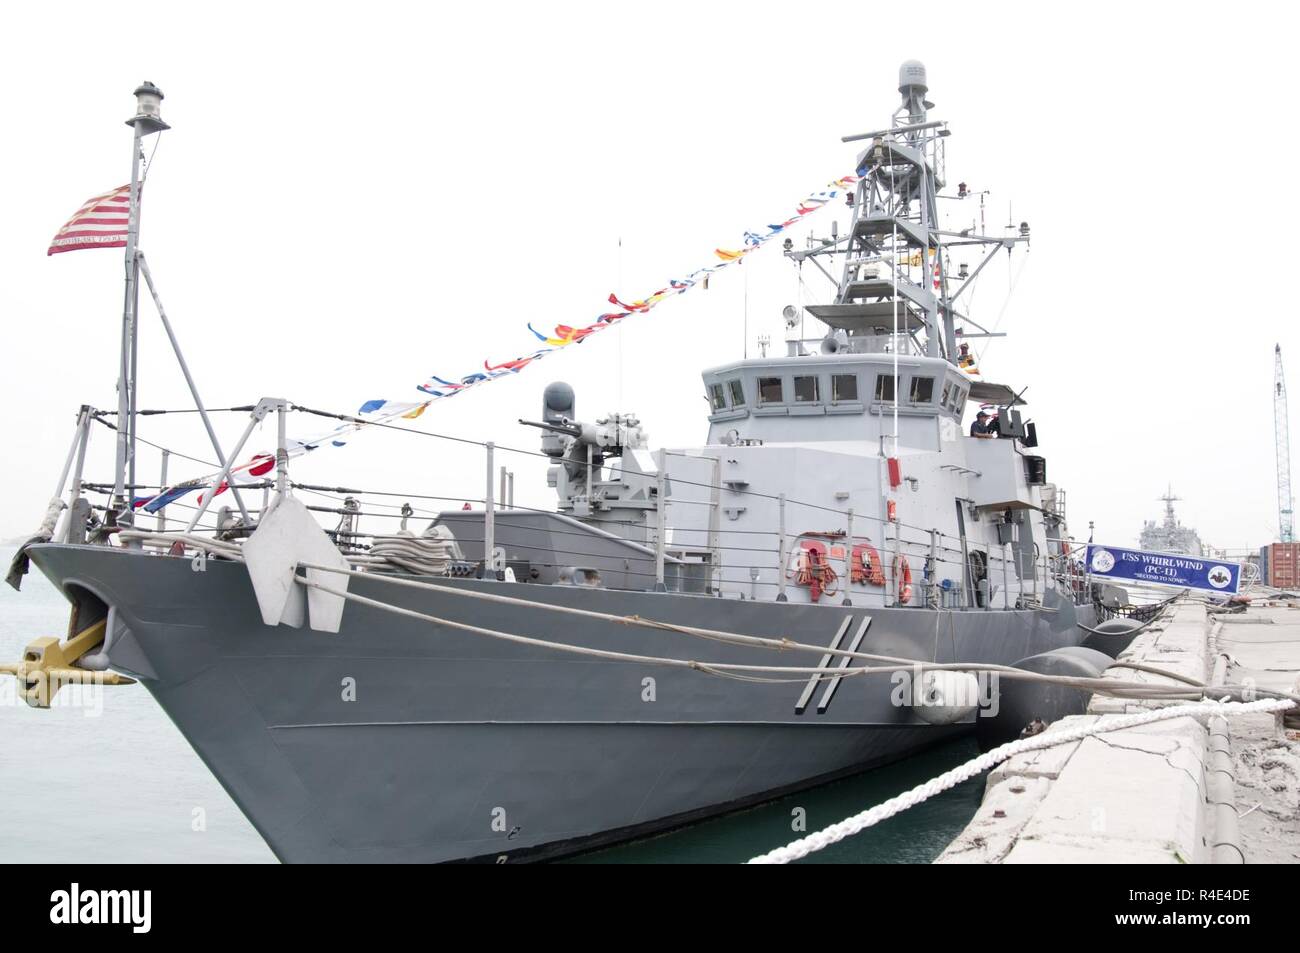 MANAMA, Bahrain (May 1, 2017) The Cyclone-class coastal patrol ship (PC) USS Whirlwind (PC 11) is moored pier side at Naval Support Activity Bahrain during the ship's change of command ceremony. The primary mission of the PCs is maritime security operations, and Whirlwind is one of 10 PCs forward deployed to Manama, Bahrain. Stock Photo